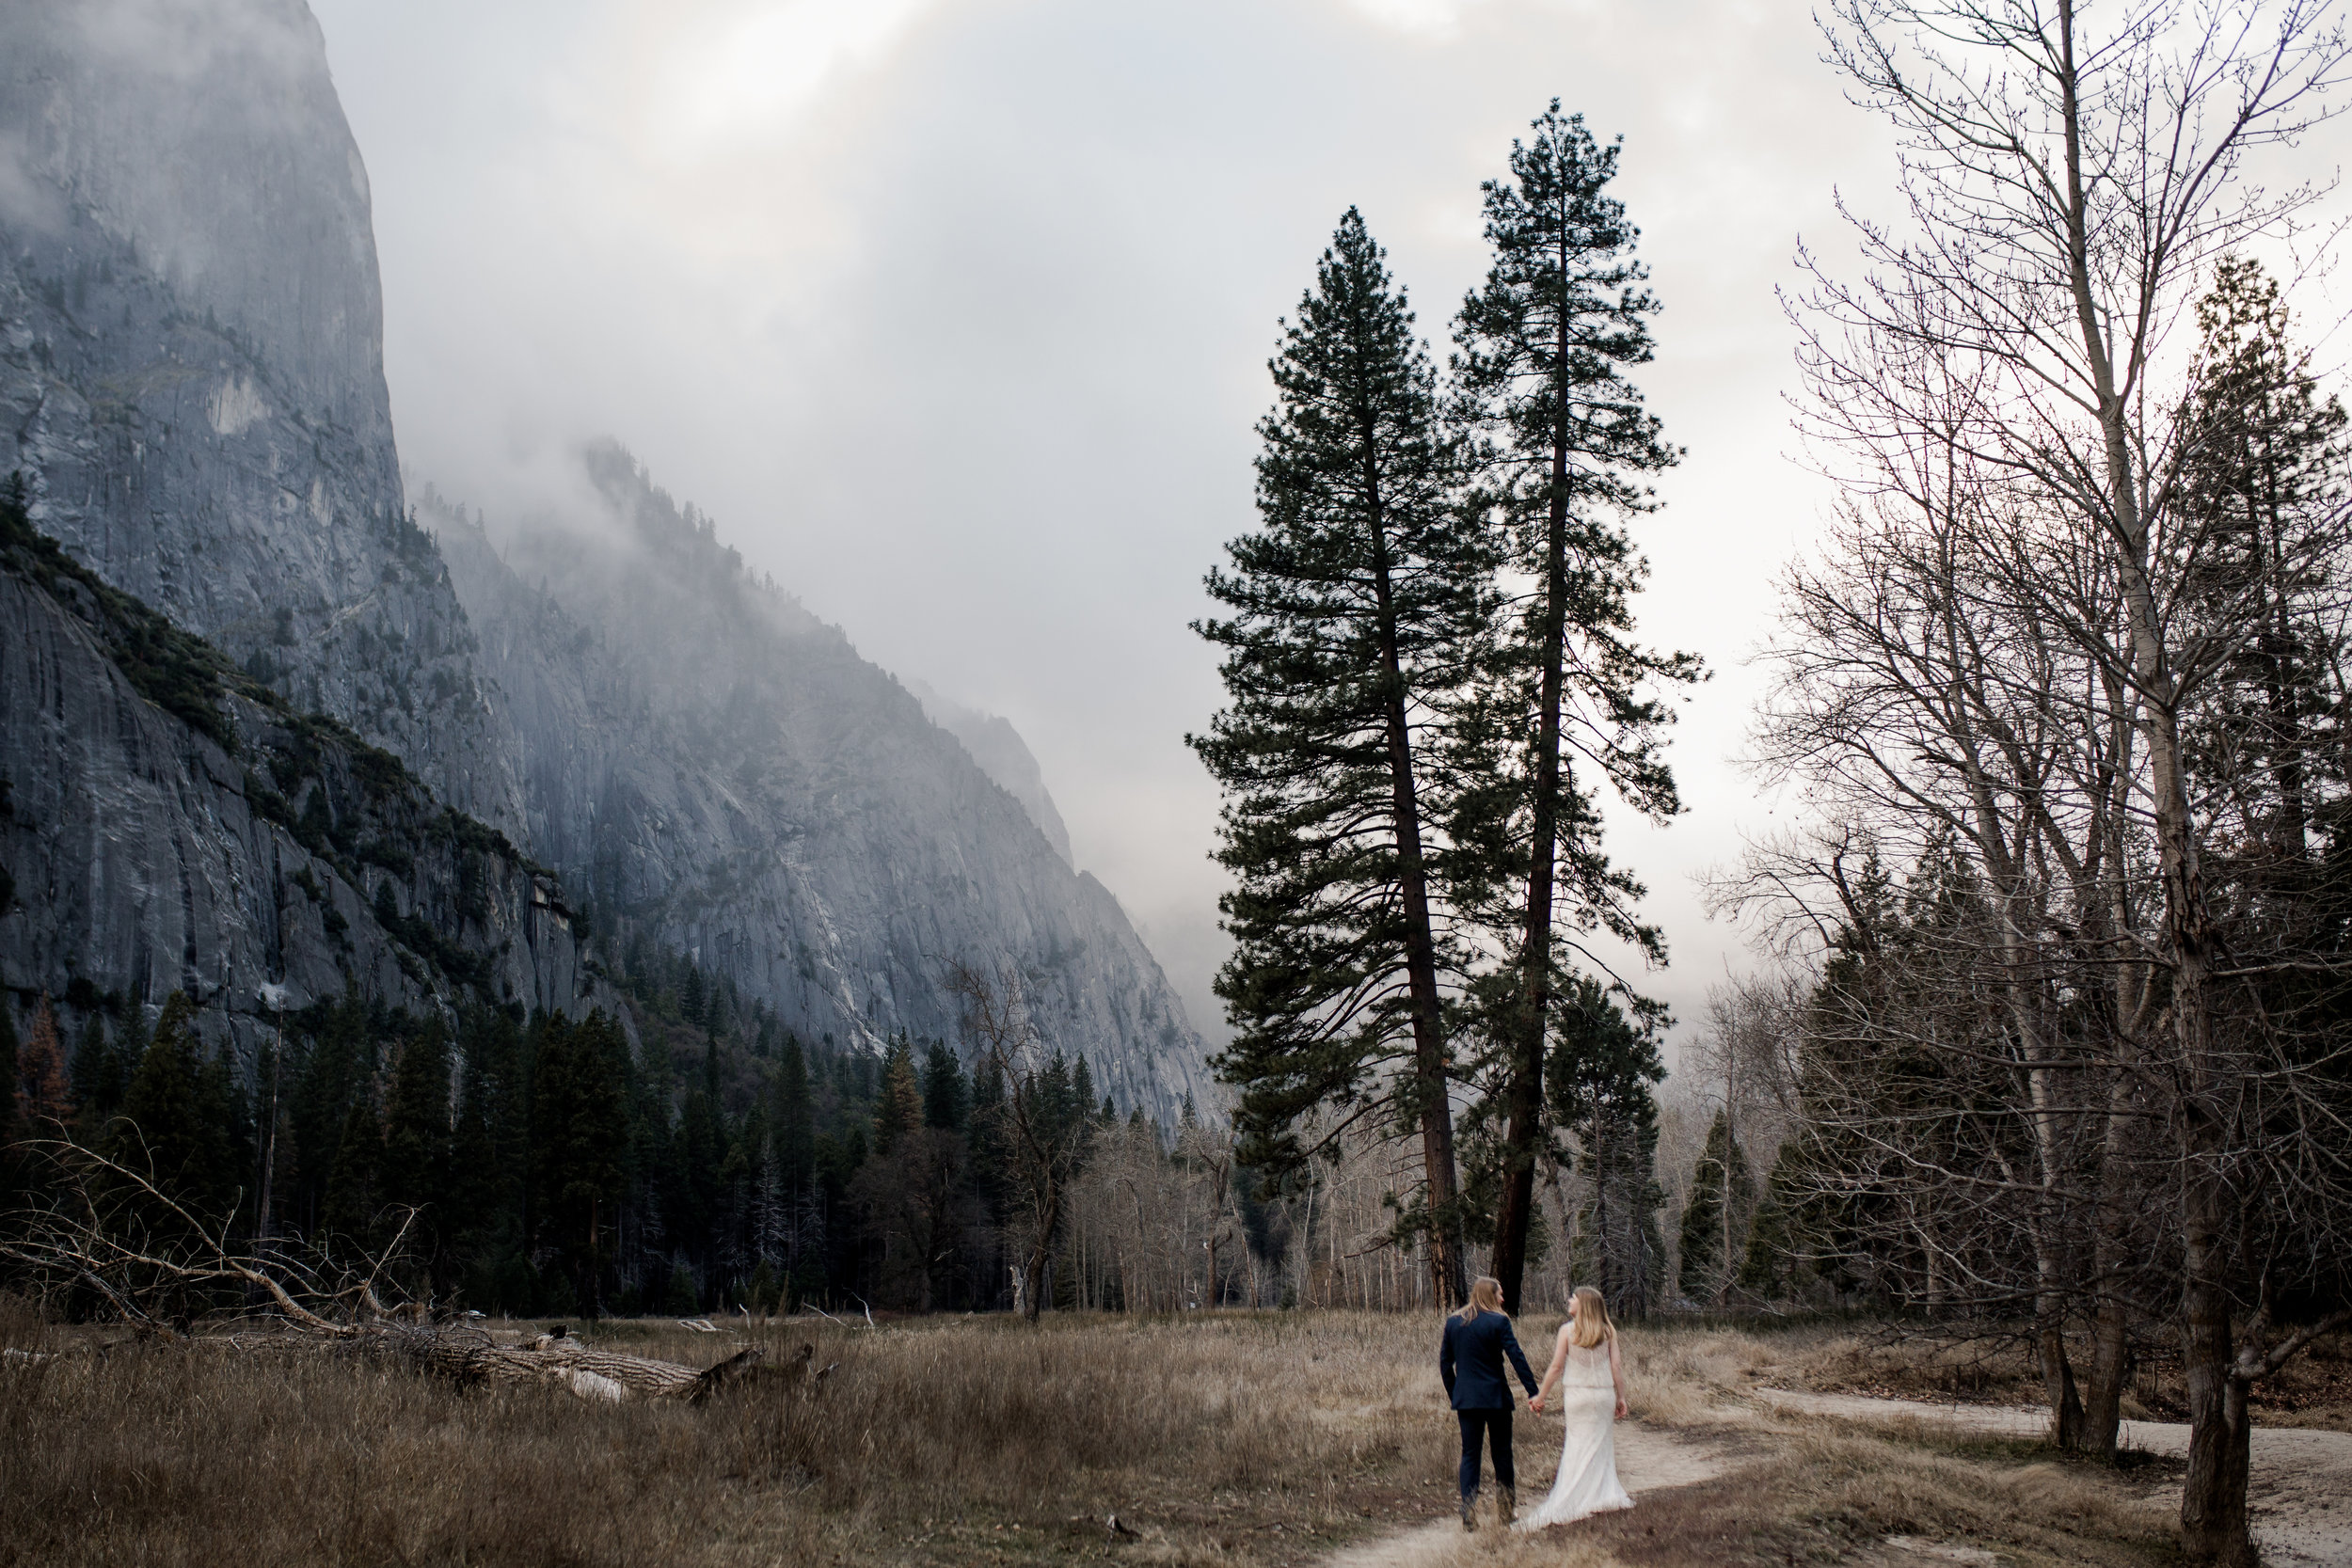 nicole-daacke-photography-yousemite-national-park-elopement-photographer-winter-cloud-moody-elope-inspiration-yosemite-valley-tunnel-view-winter-cloud-fog-weather-wedding-photos-56.jpg